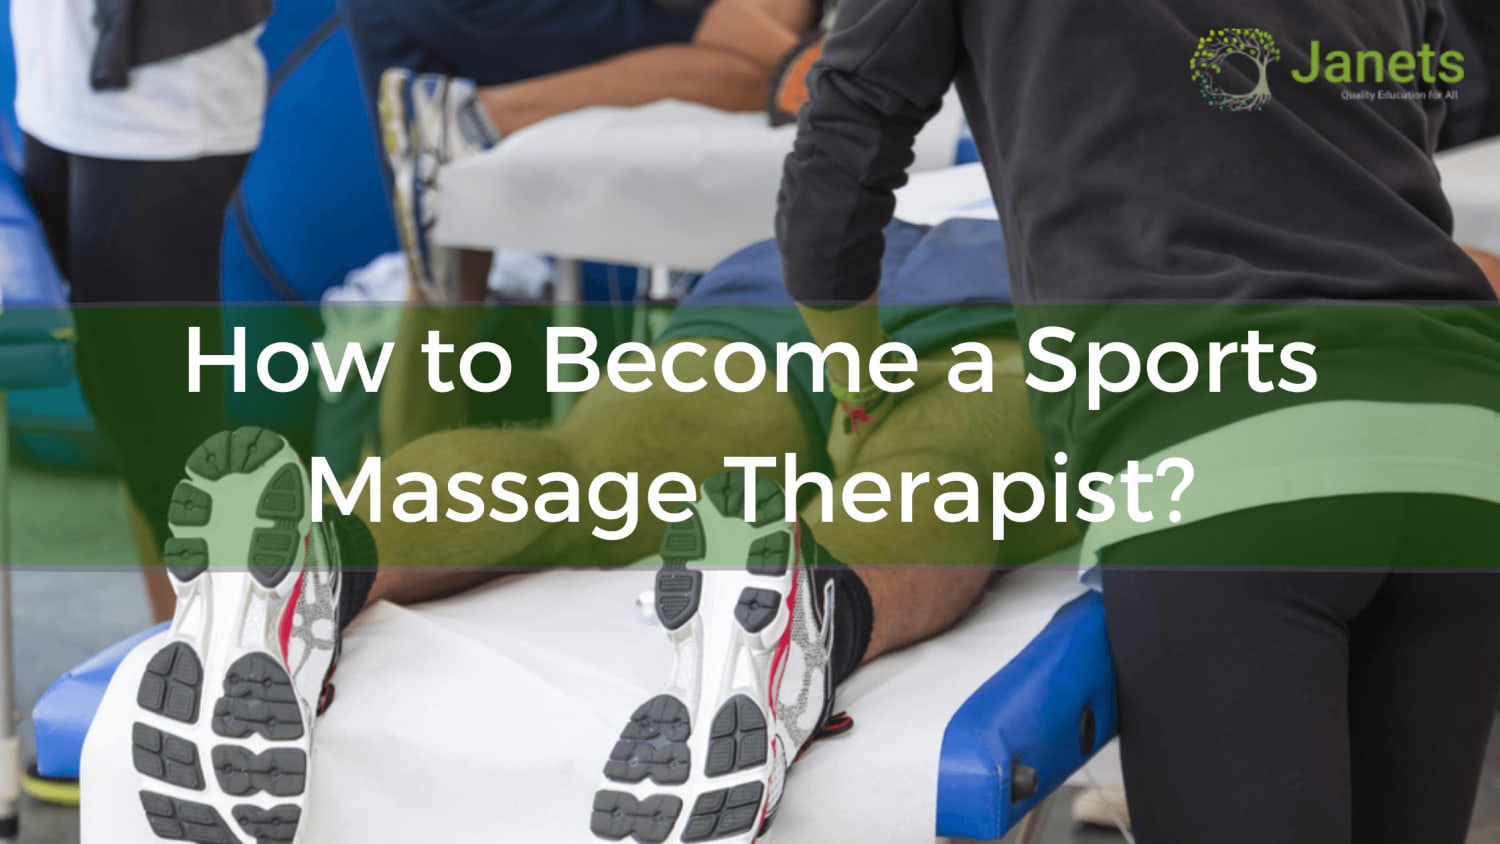 How to Become a Sports Massage Therapist?